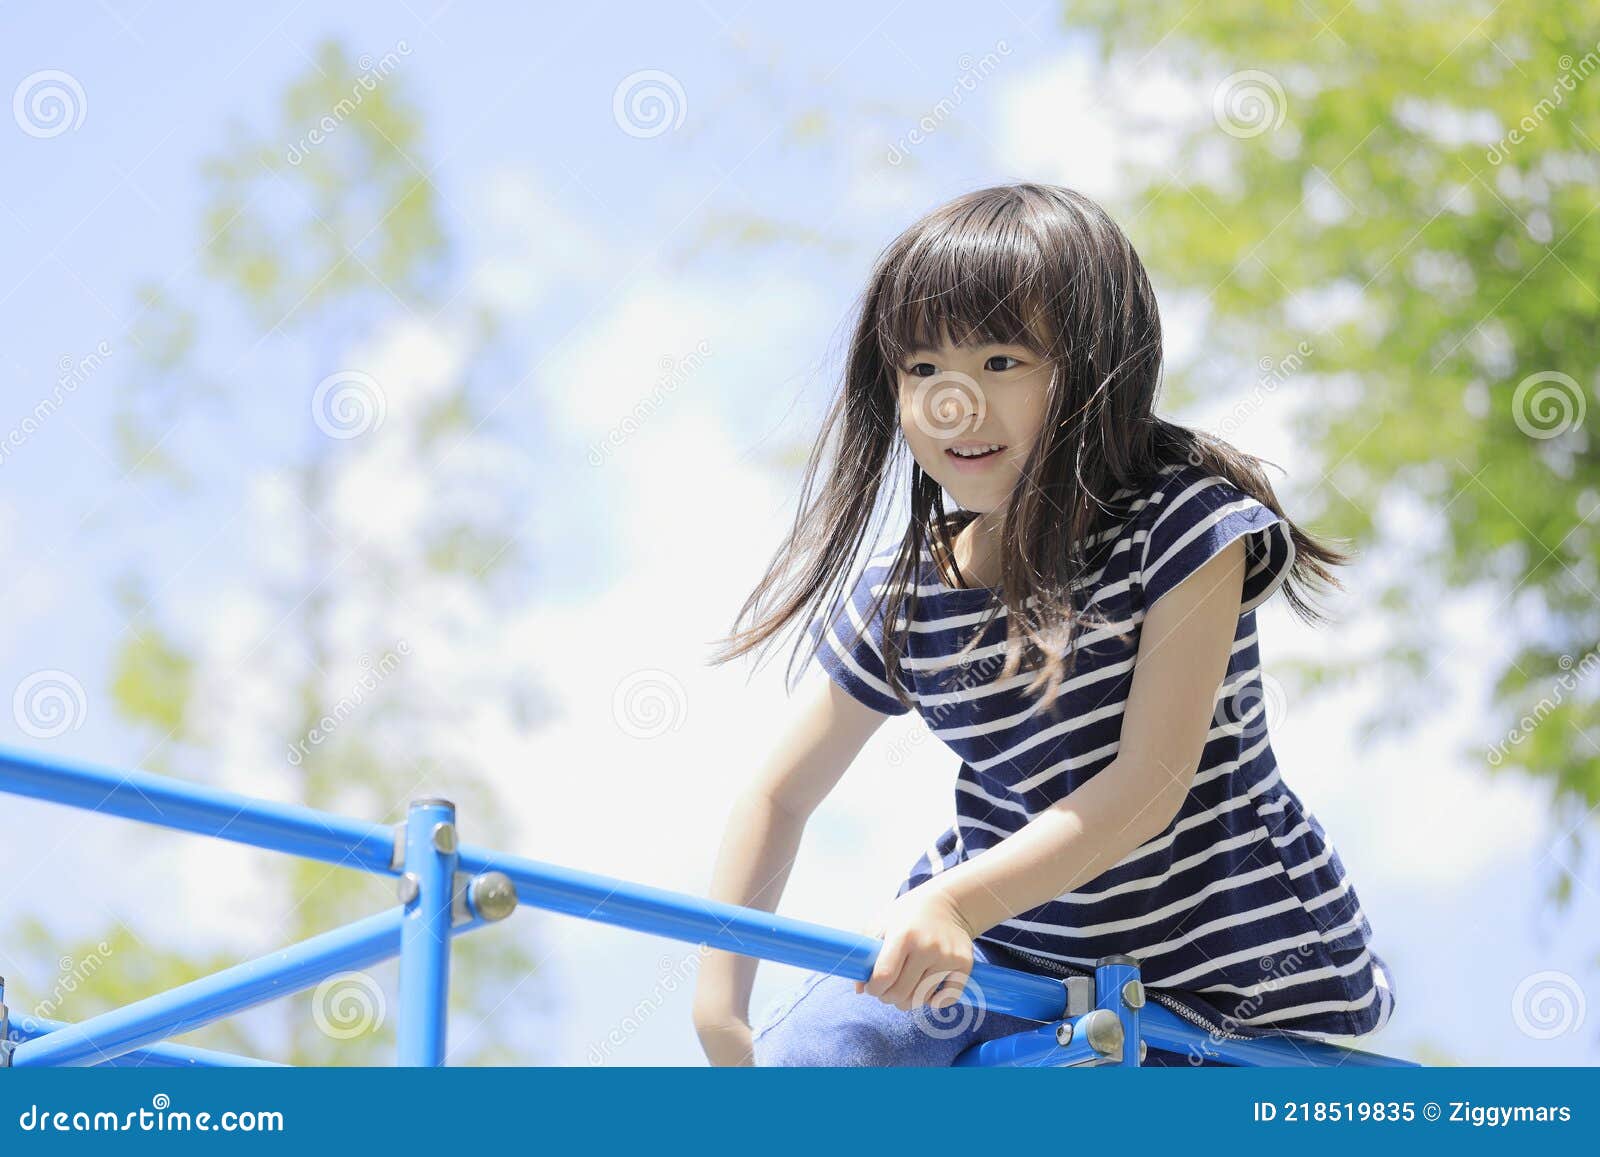 Japanese Student Girl on the Jungle Gym Stock Image - Image of ethnicity,  open: 218519835